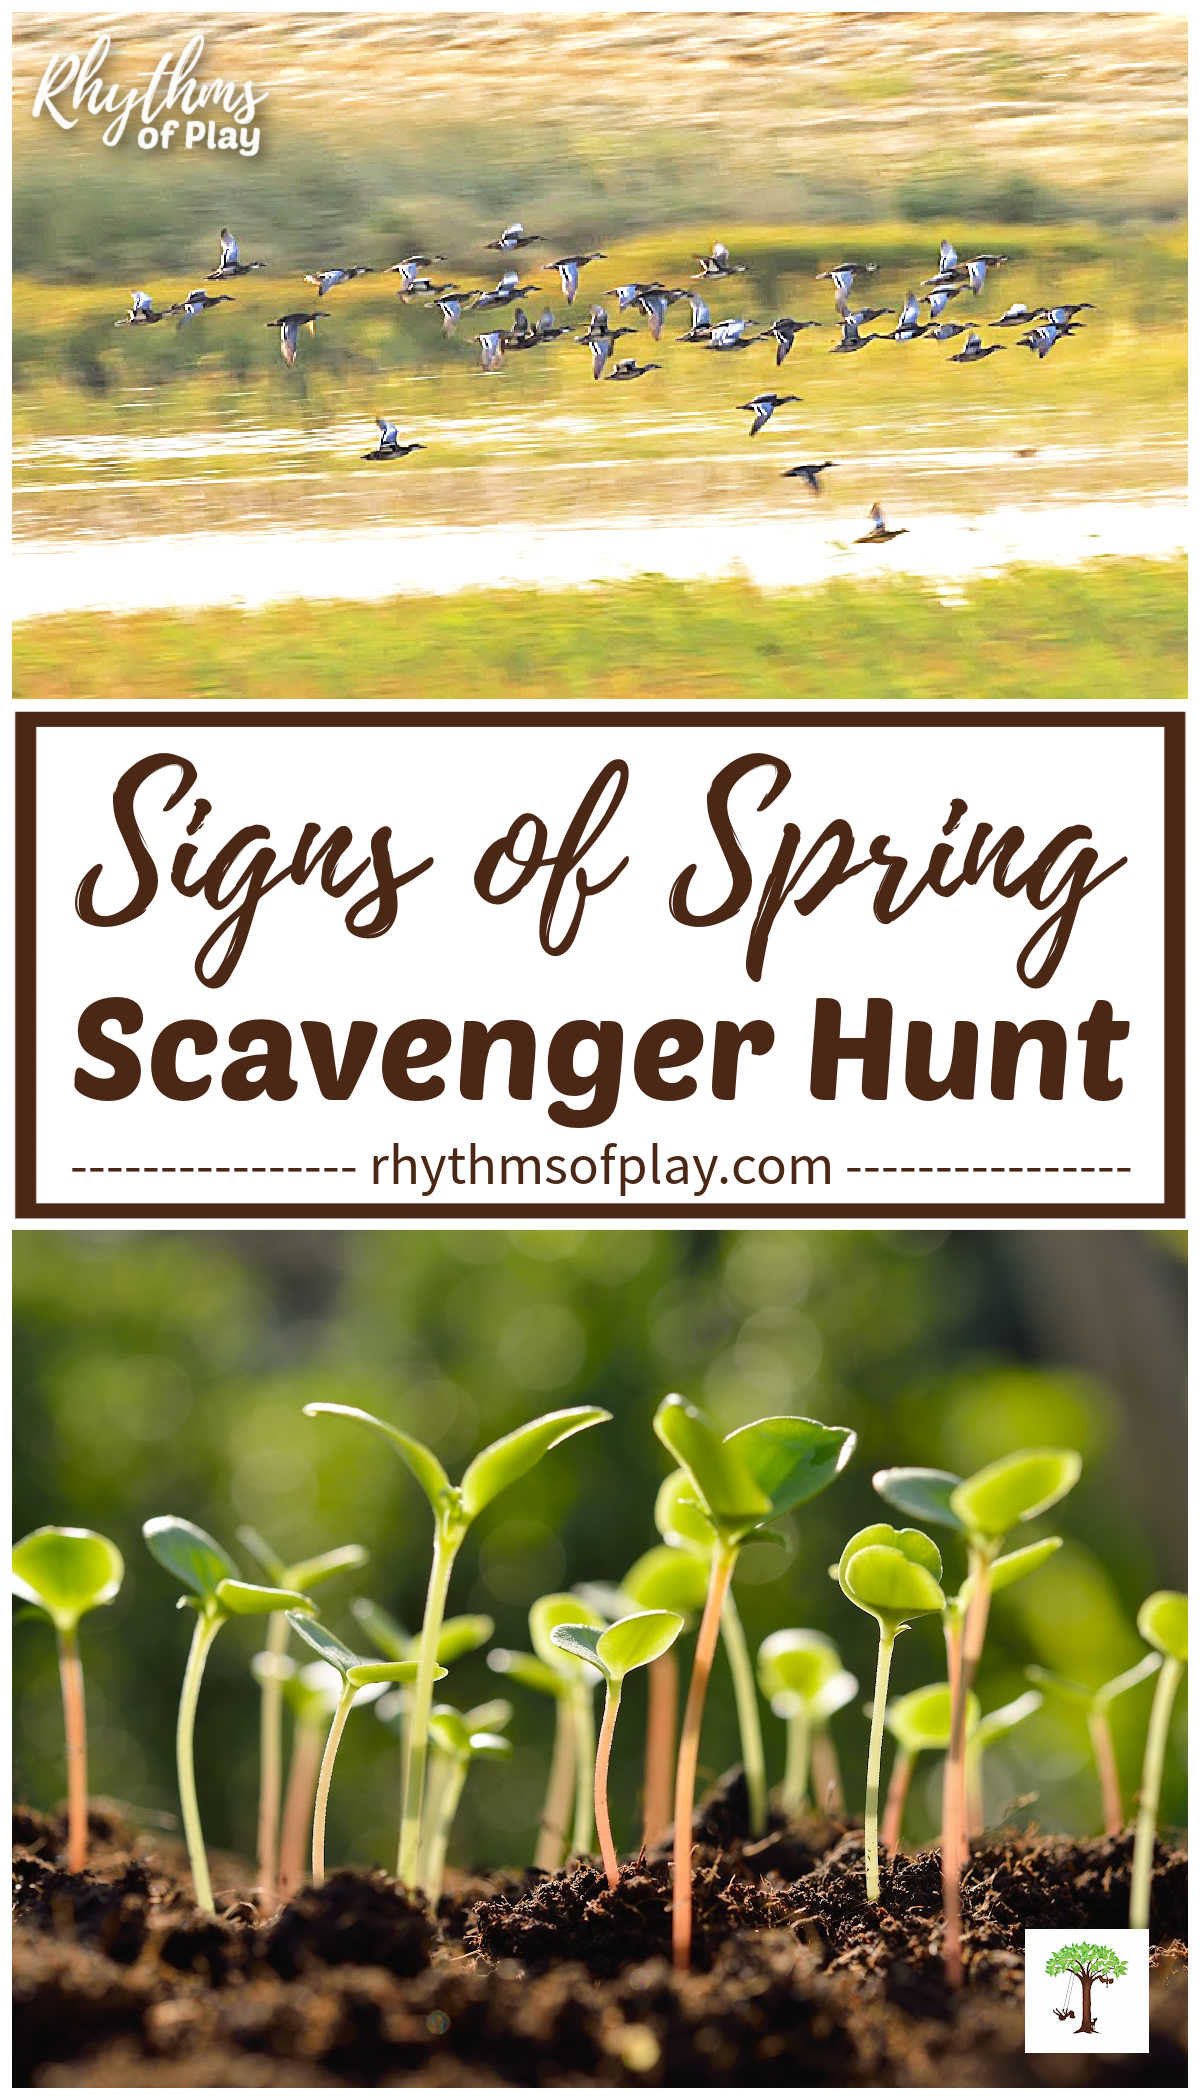 Signs of spring scavenger hunt - large flock of birds migrating and sprouts coming up from the ground.